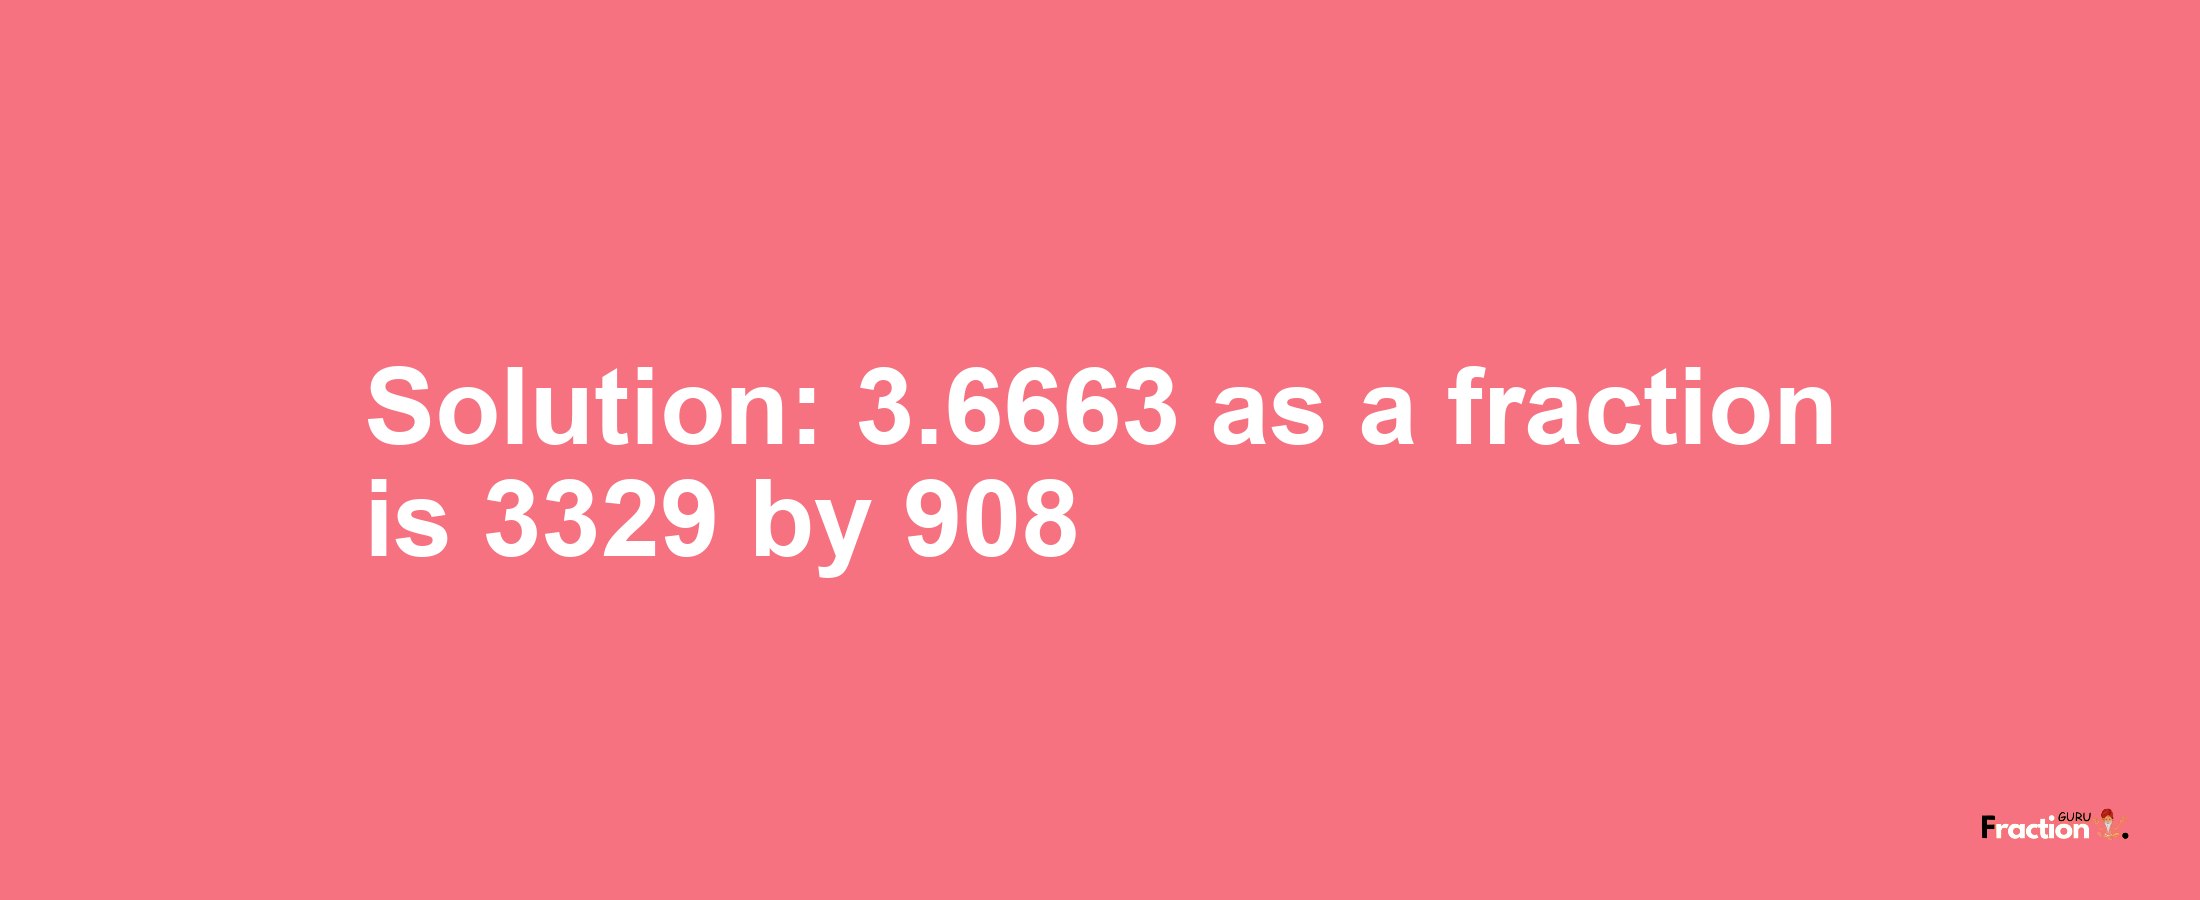 Solution:3.6663 as a fraction is 3329/908